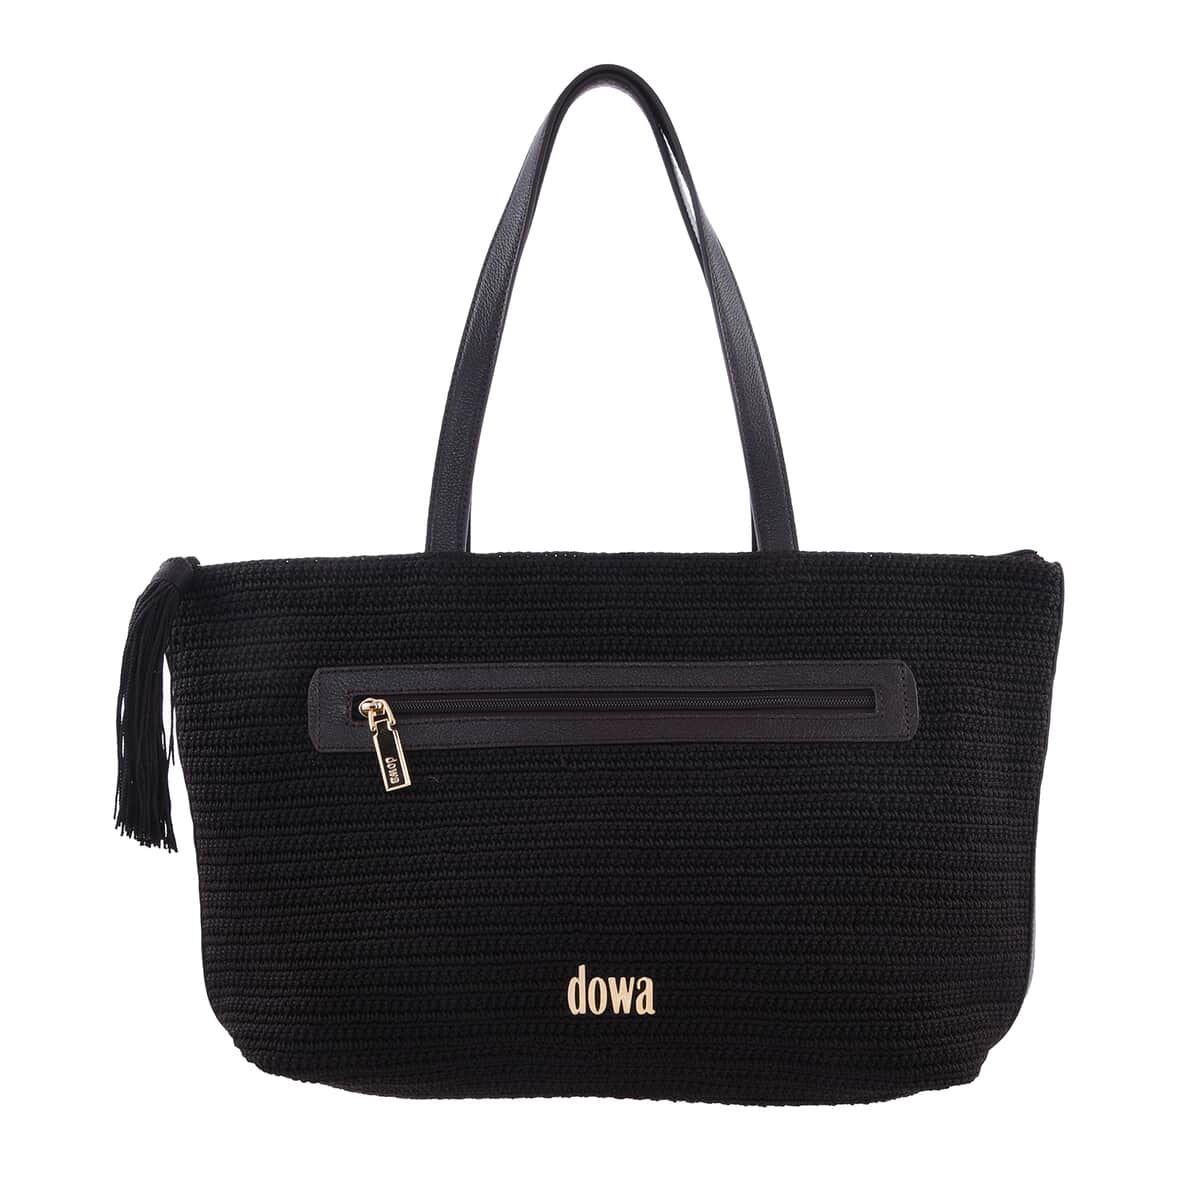 Dowa Dark Brown 100% Nylon with Leather Handwoven Tote Bag image number 0